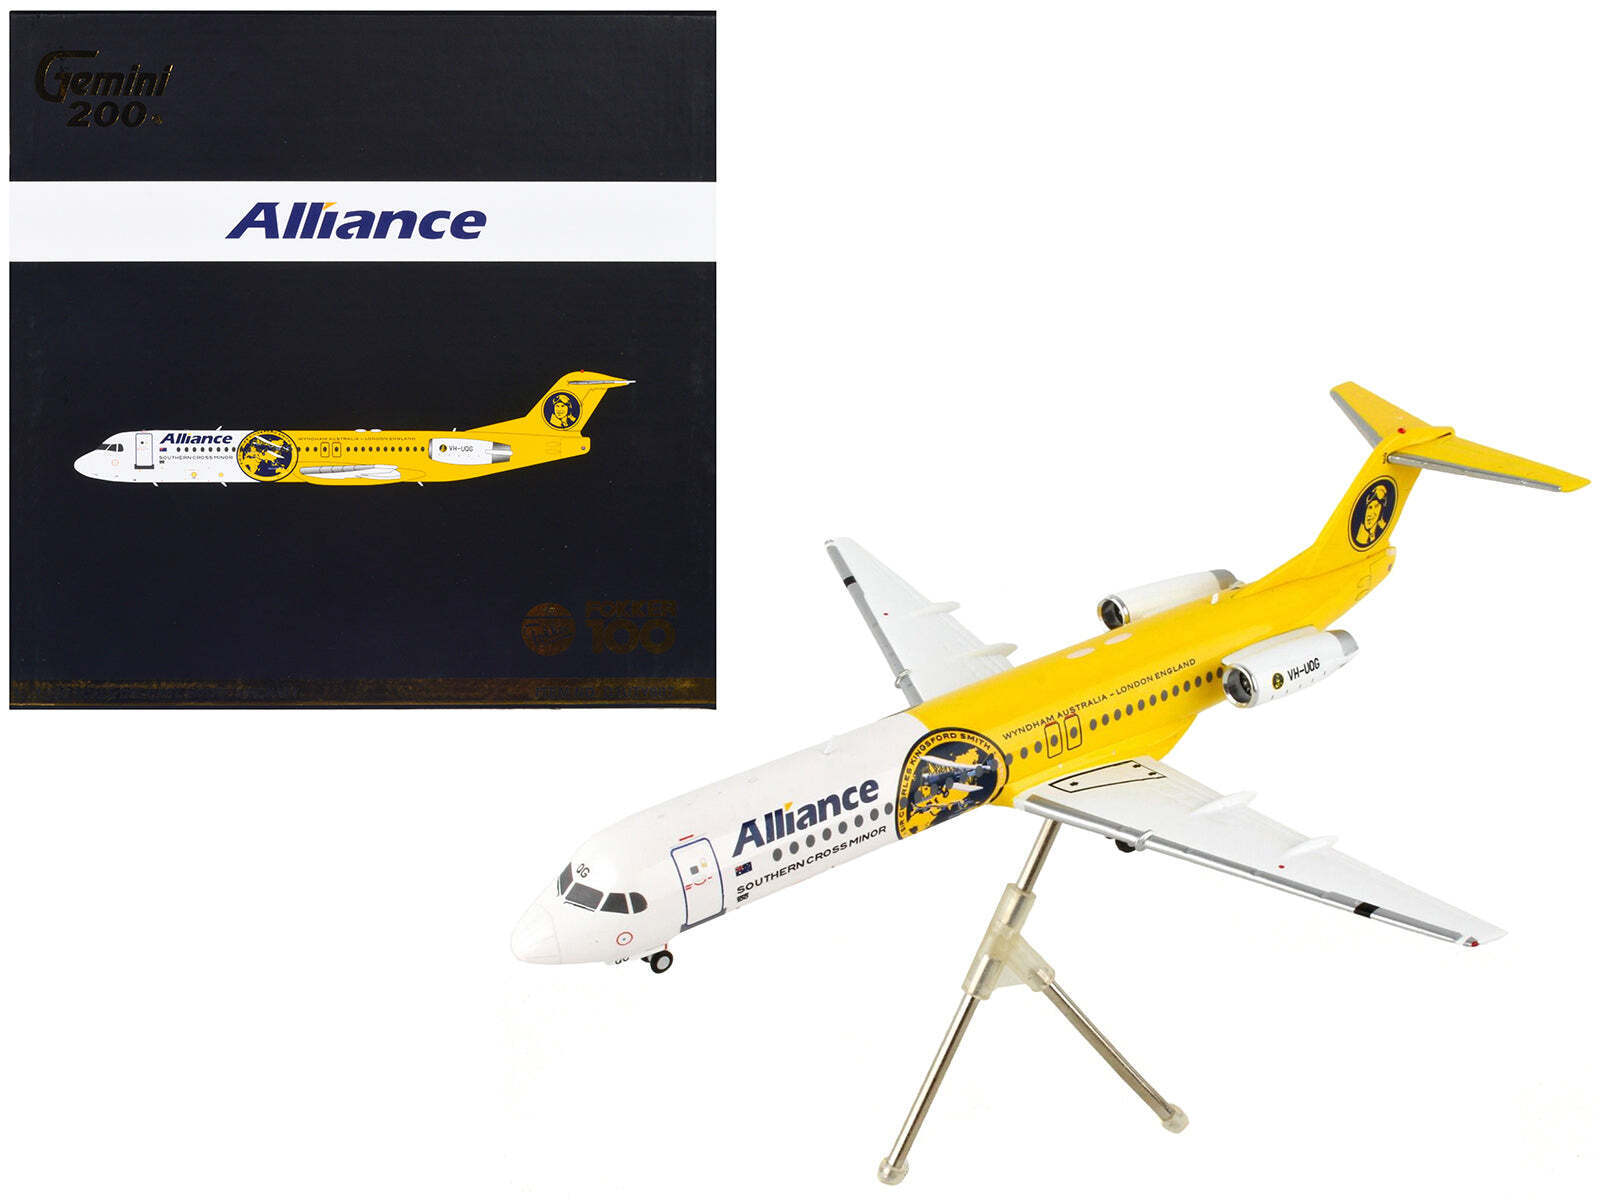 Fokker F100 Commercial Alliance Airlines Gemini 200 1/200 Diecast Model Airplane